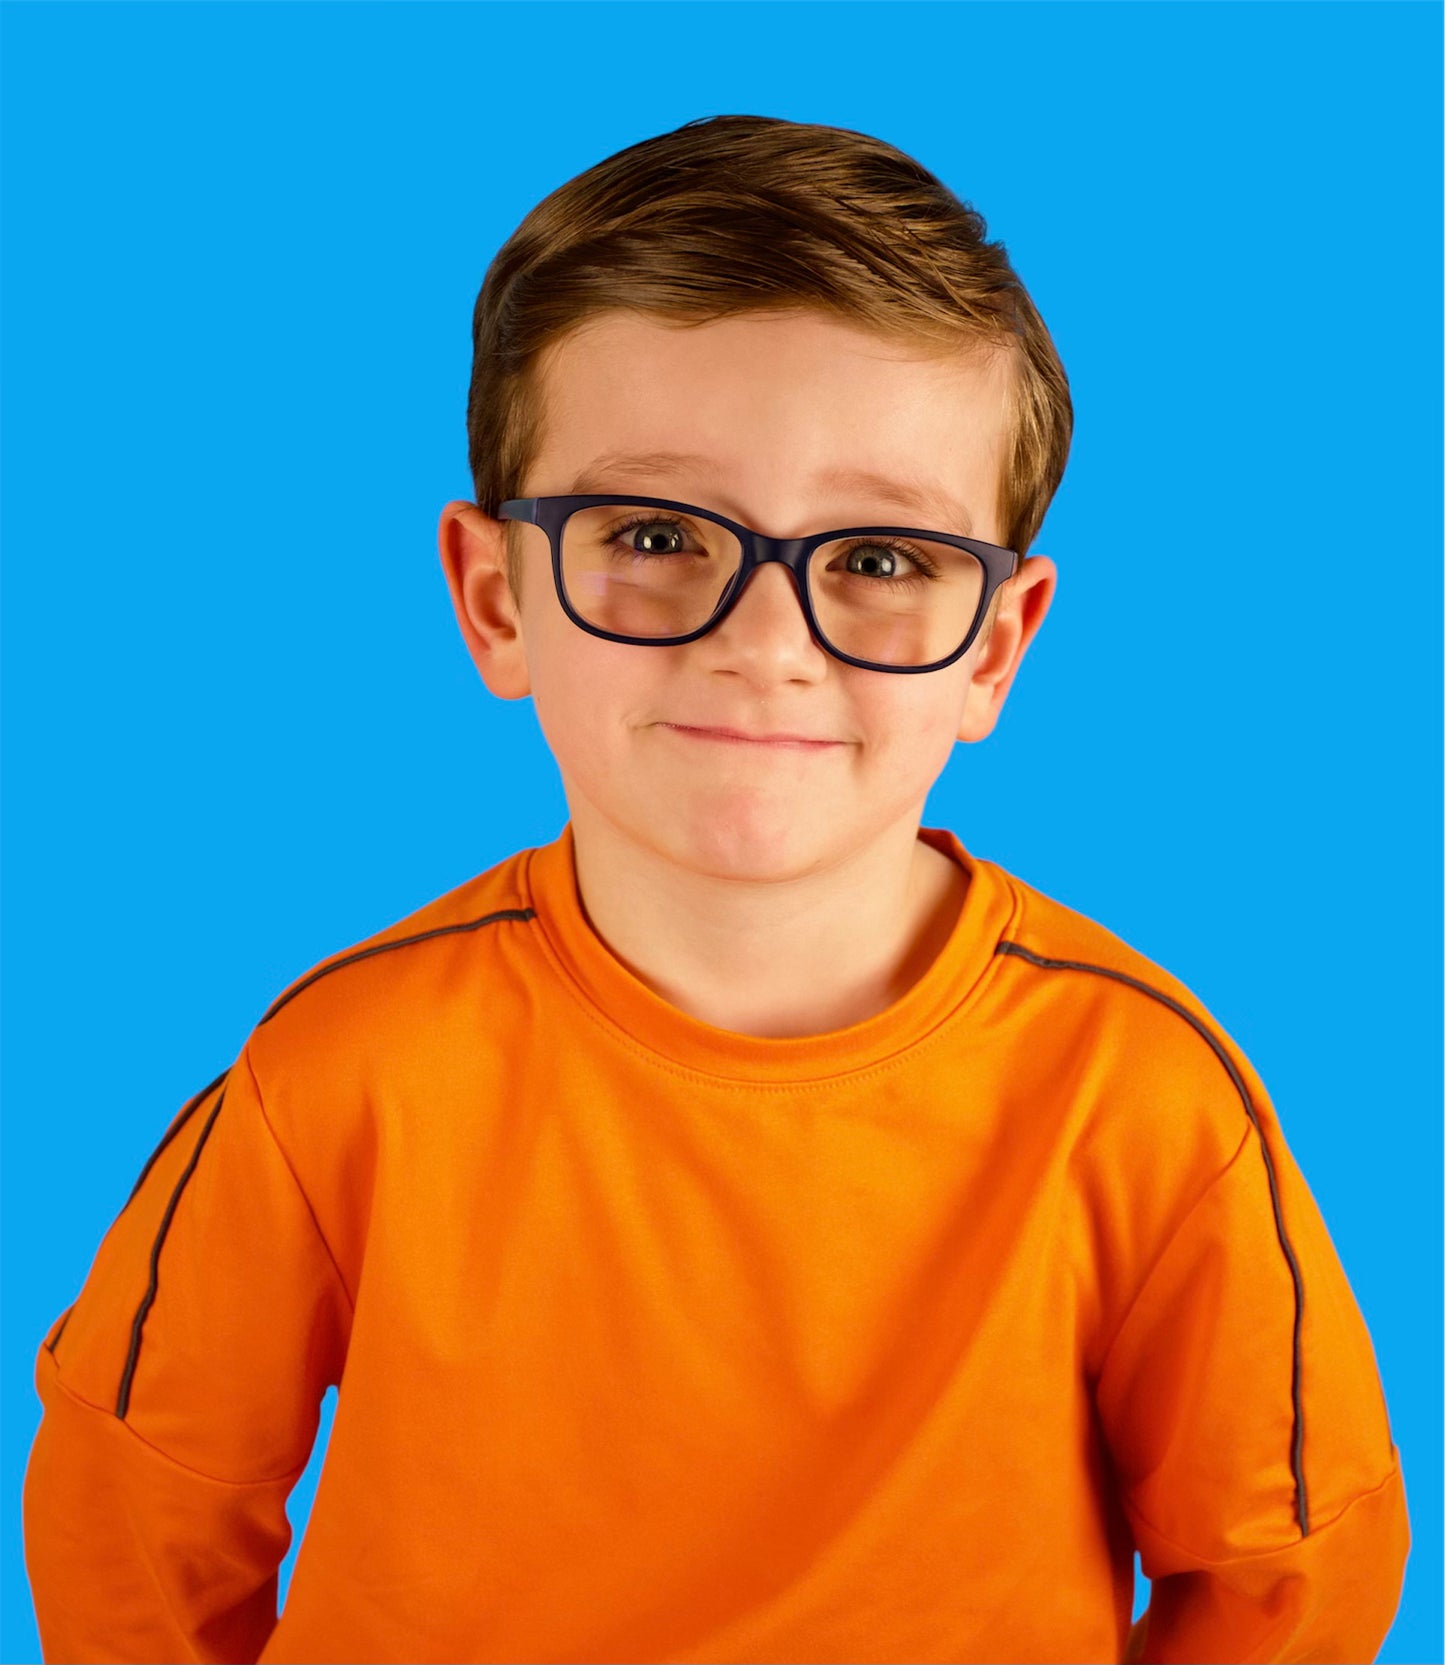 Model view of Orlando Kids, children's, cute, fashionable, blue, blue light blocking glasses with protective frames.